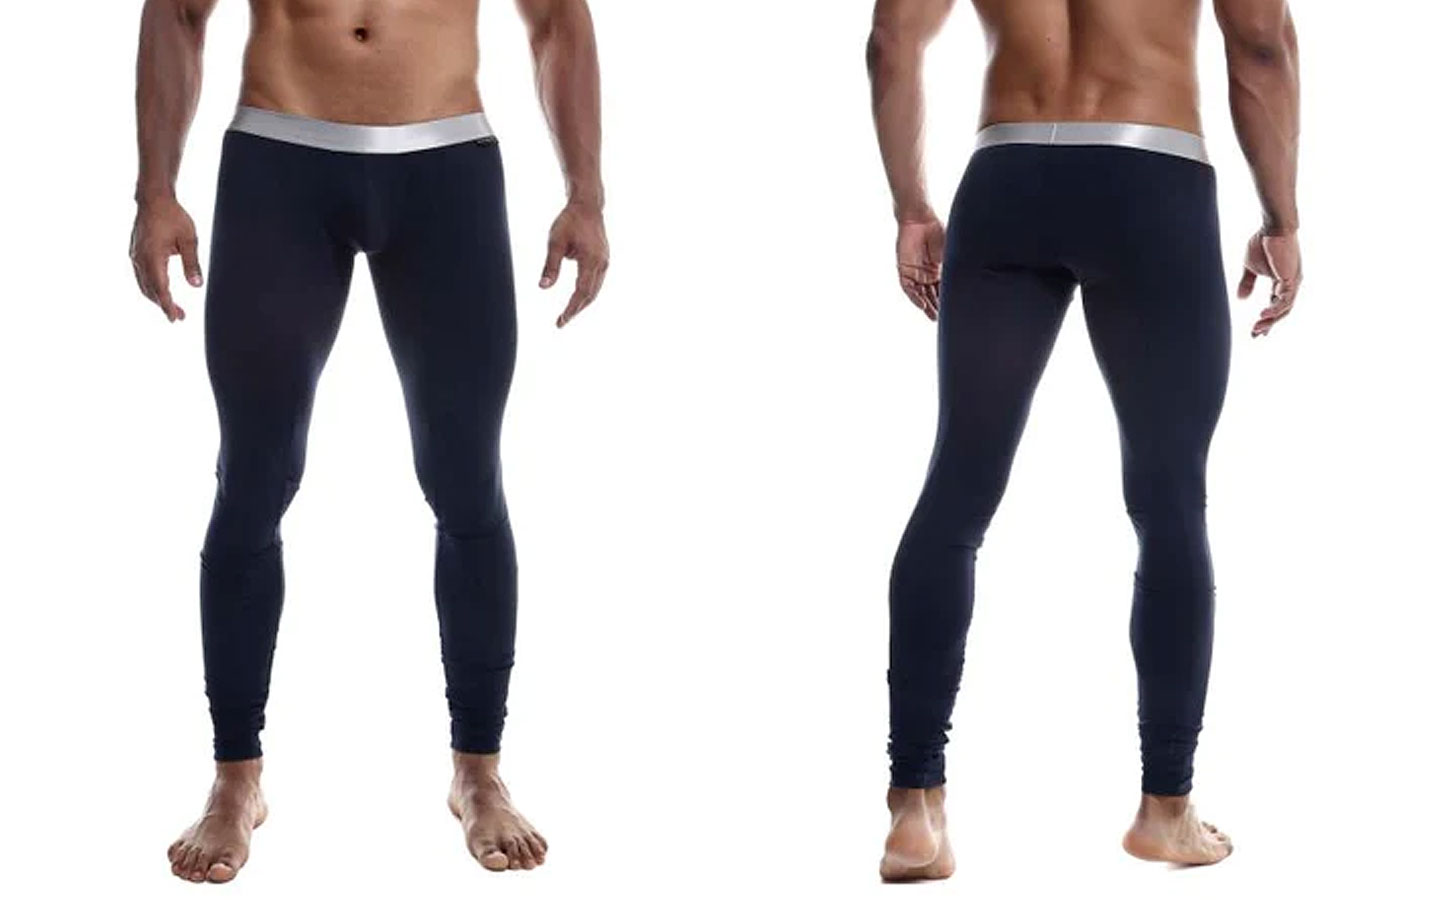 Tips for getting long johns